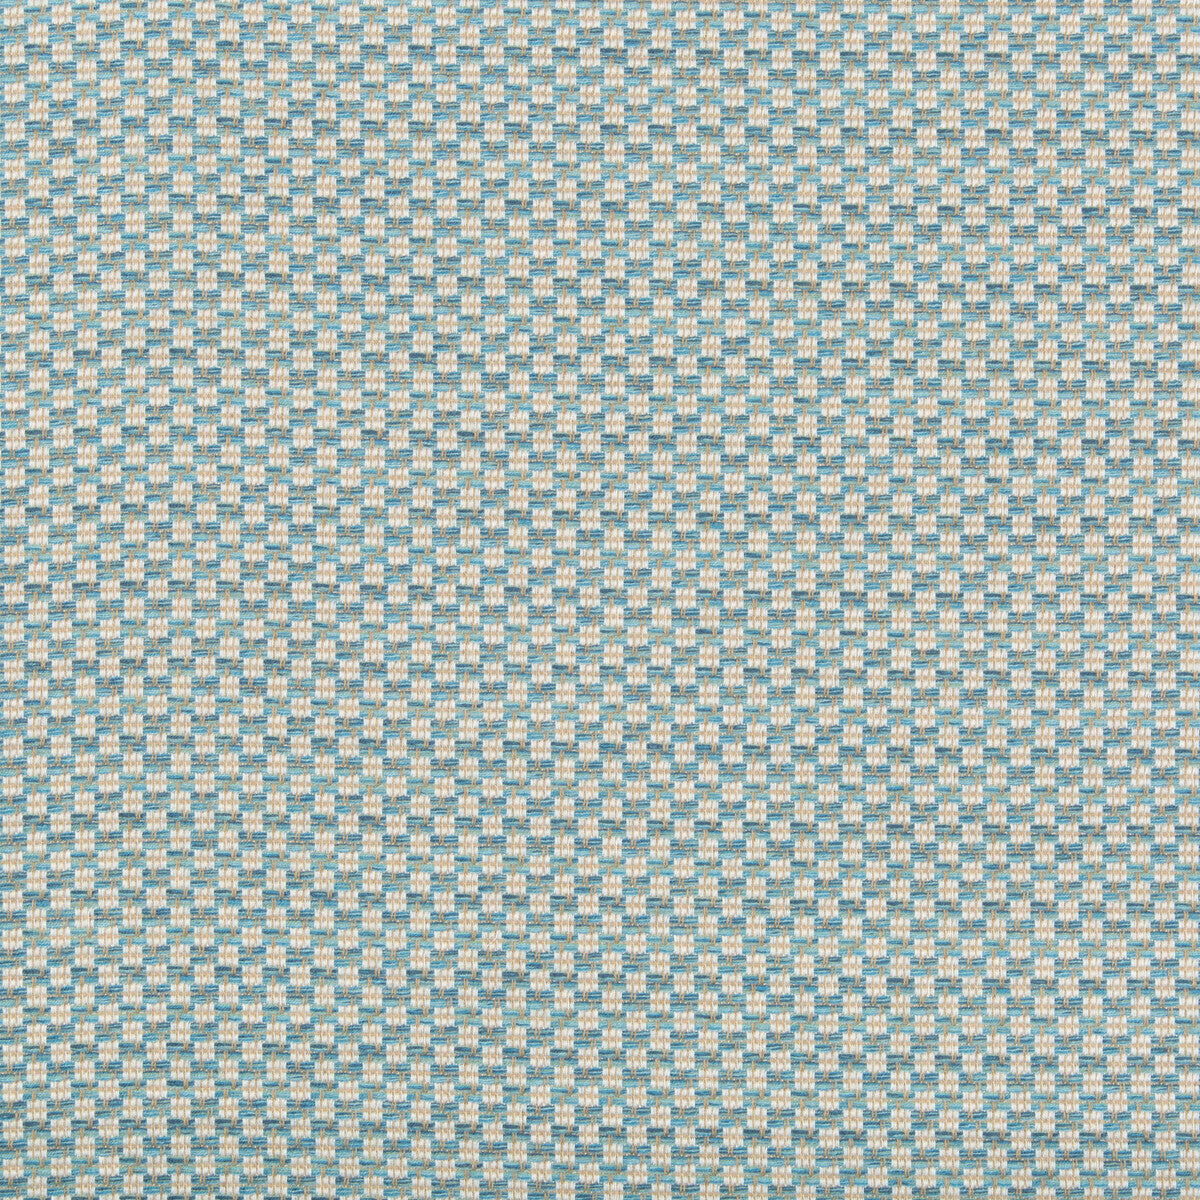 Alturas fabric in sky color - pattern 2018109.15.0 - by Lee Jofa in the Gresham Textures collection